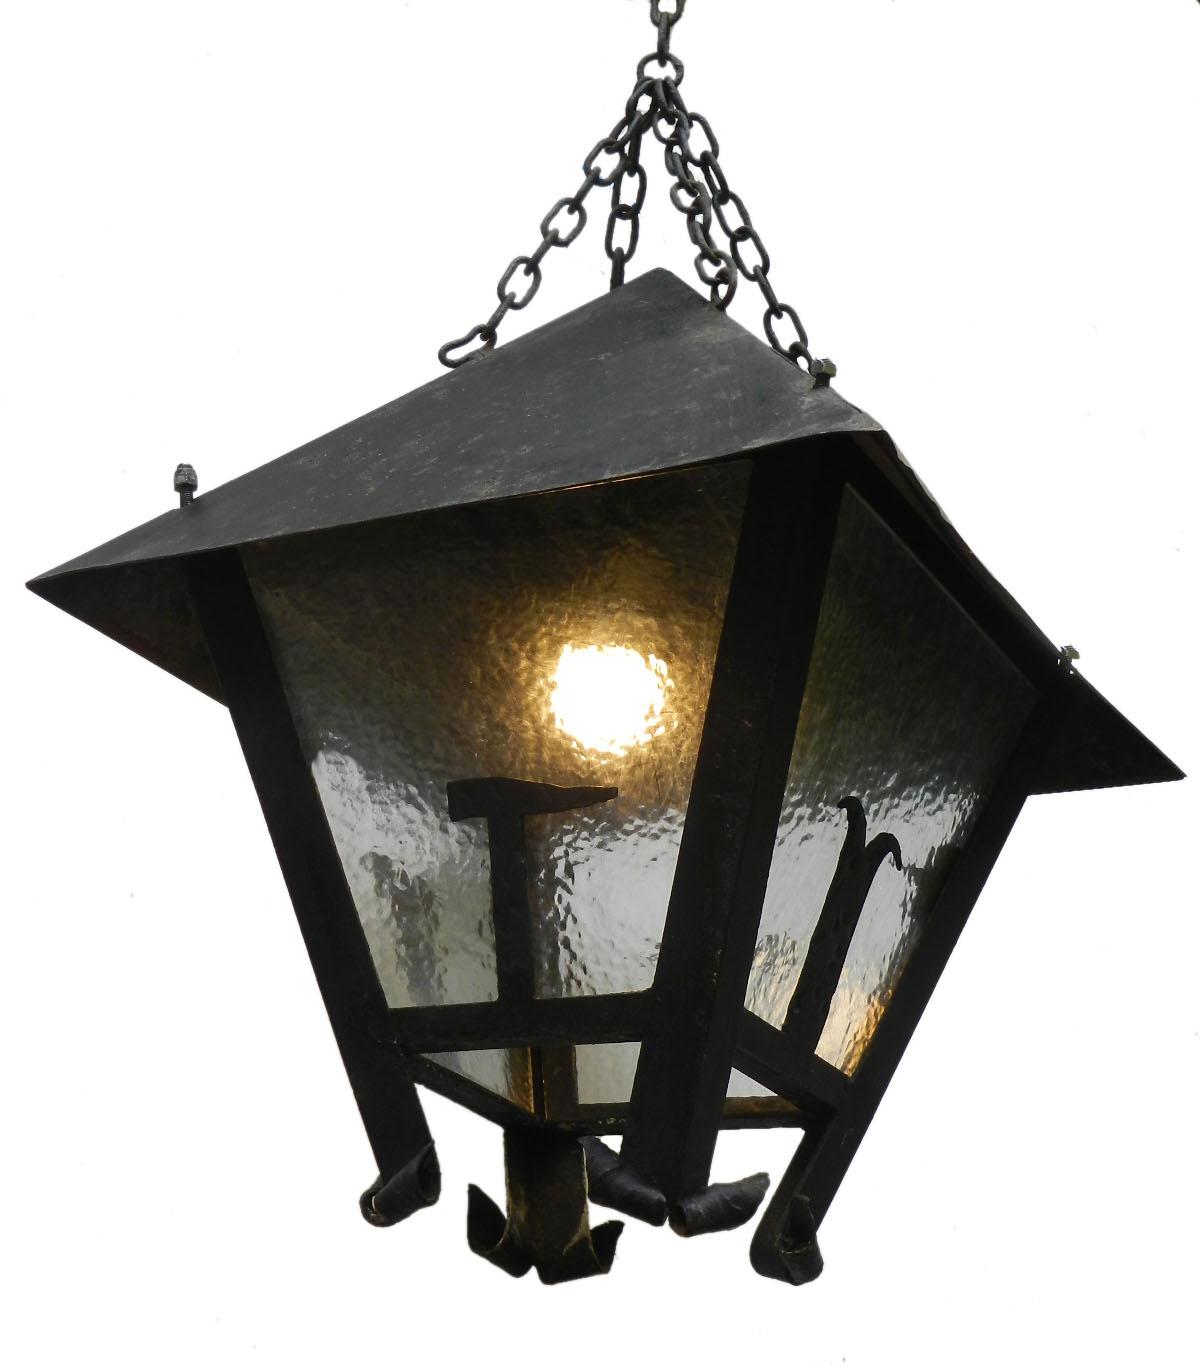 Large exterior hanging lantern wrought iron and obscured glass
Art & Crafts
Present drop with chain is 110 cms easily extended or reduced
Great weathered patina, can be re painted if preferred
Actual lantern is
Measures: Height 65 cm (25.6